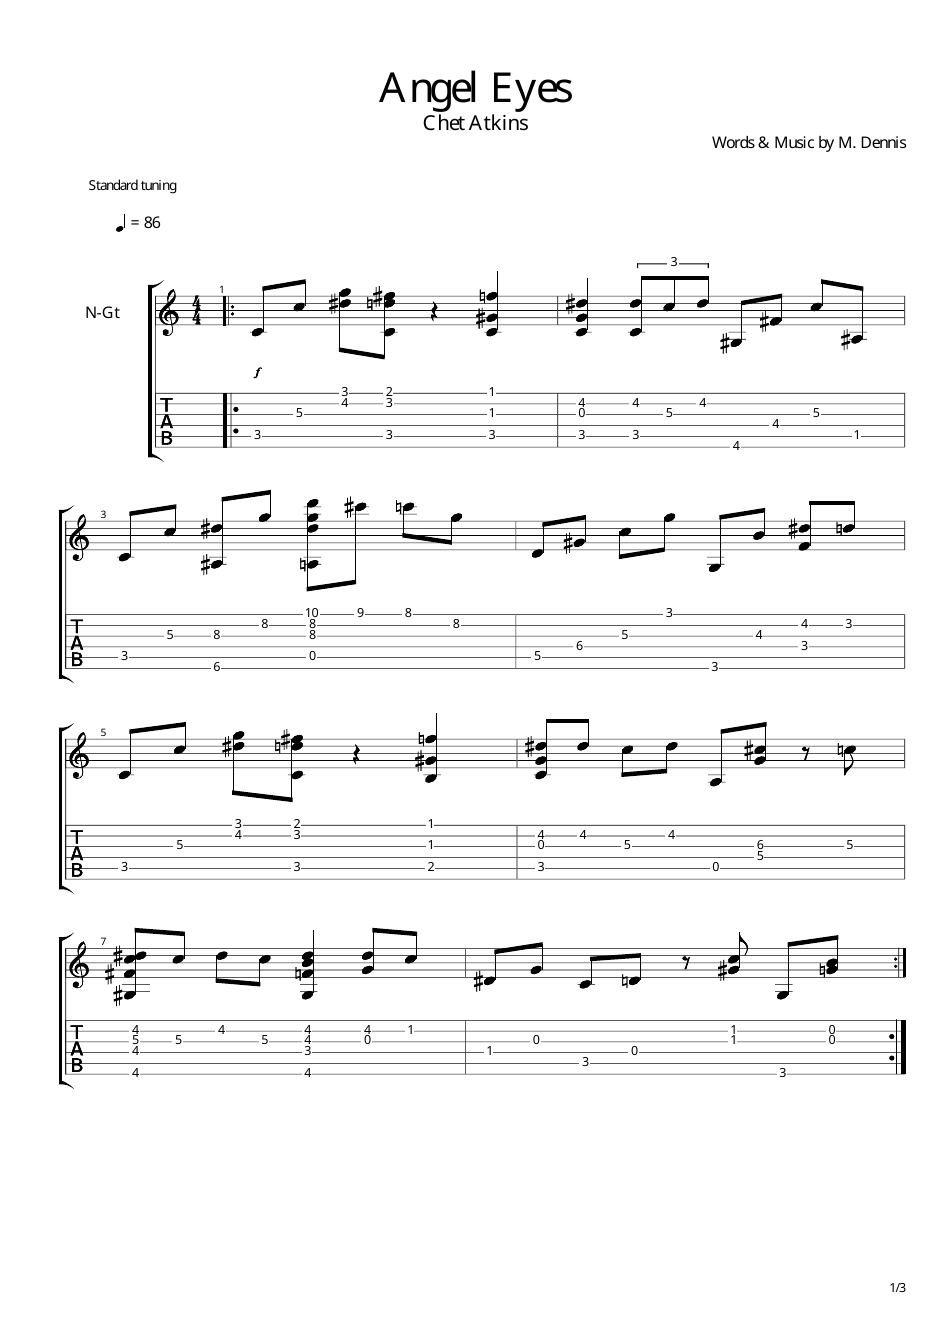 Angel Eyes Guitar Tab and Sheet Music by Chet Atkins